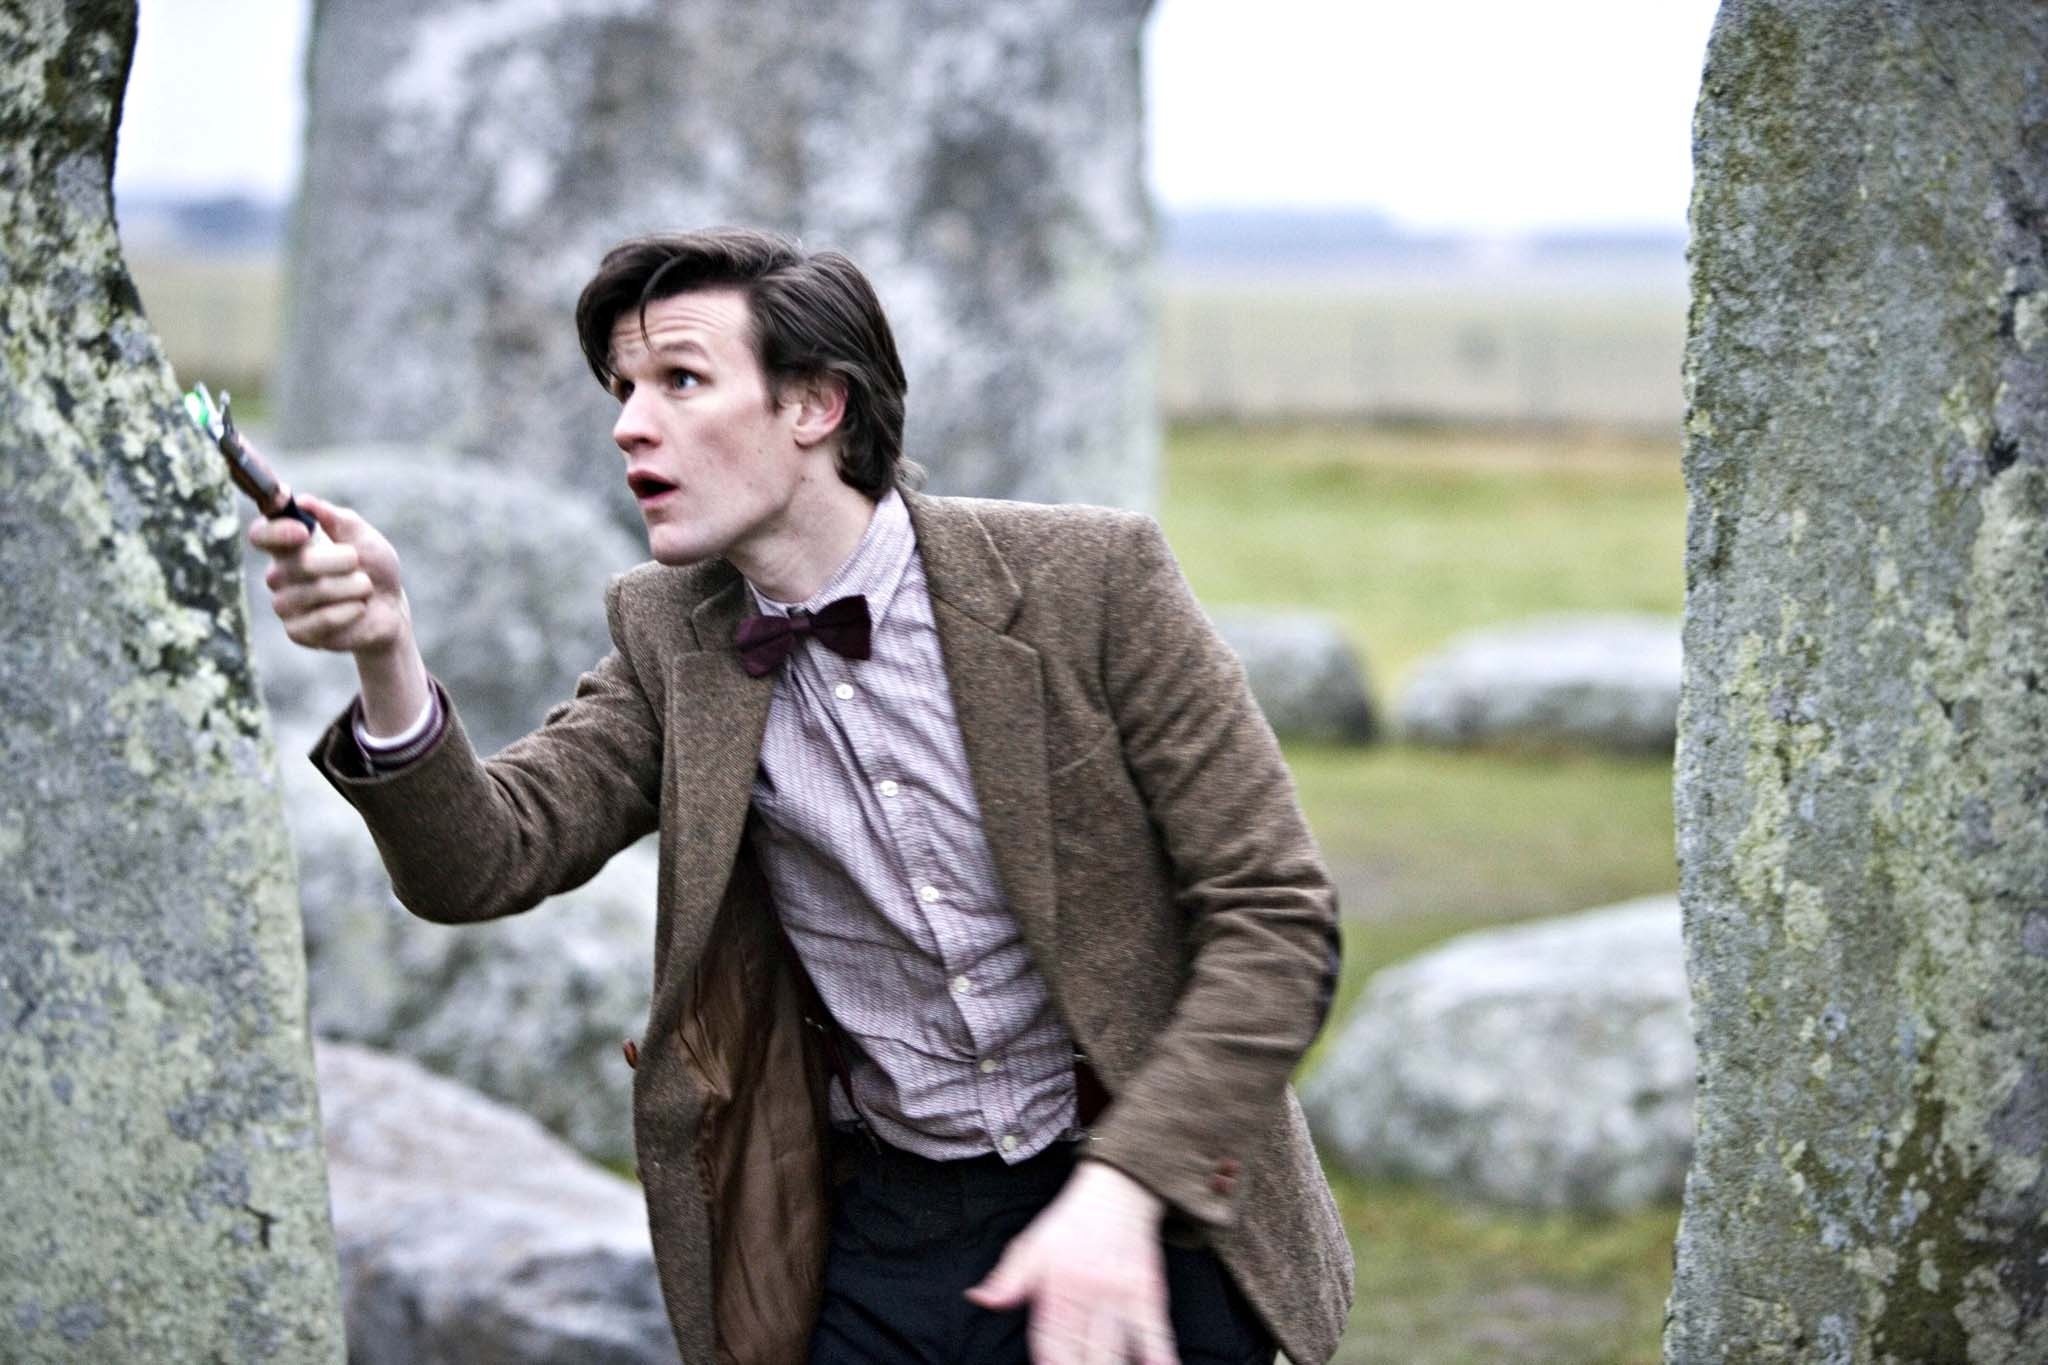 the eleventh doctor scans stonehenge in the pandorica opens.